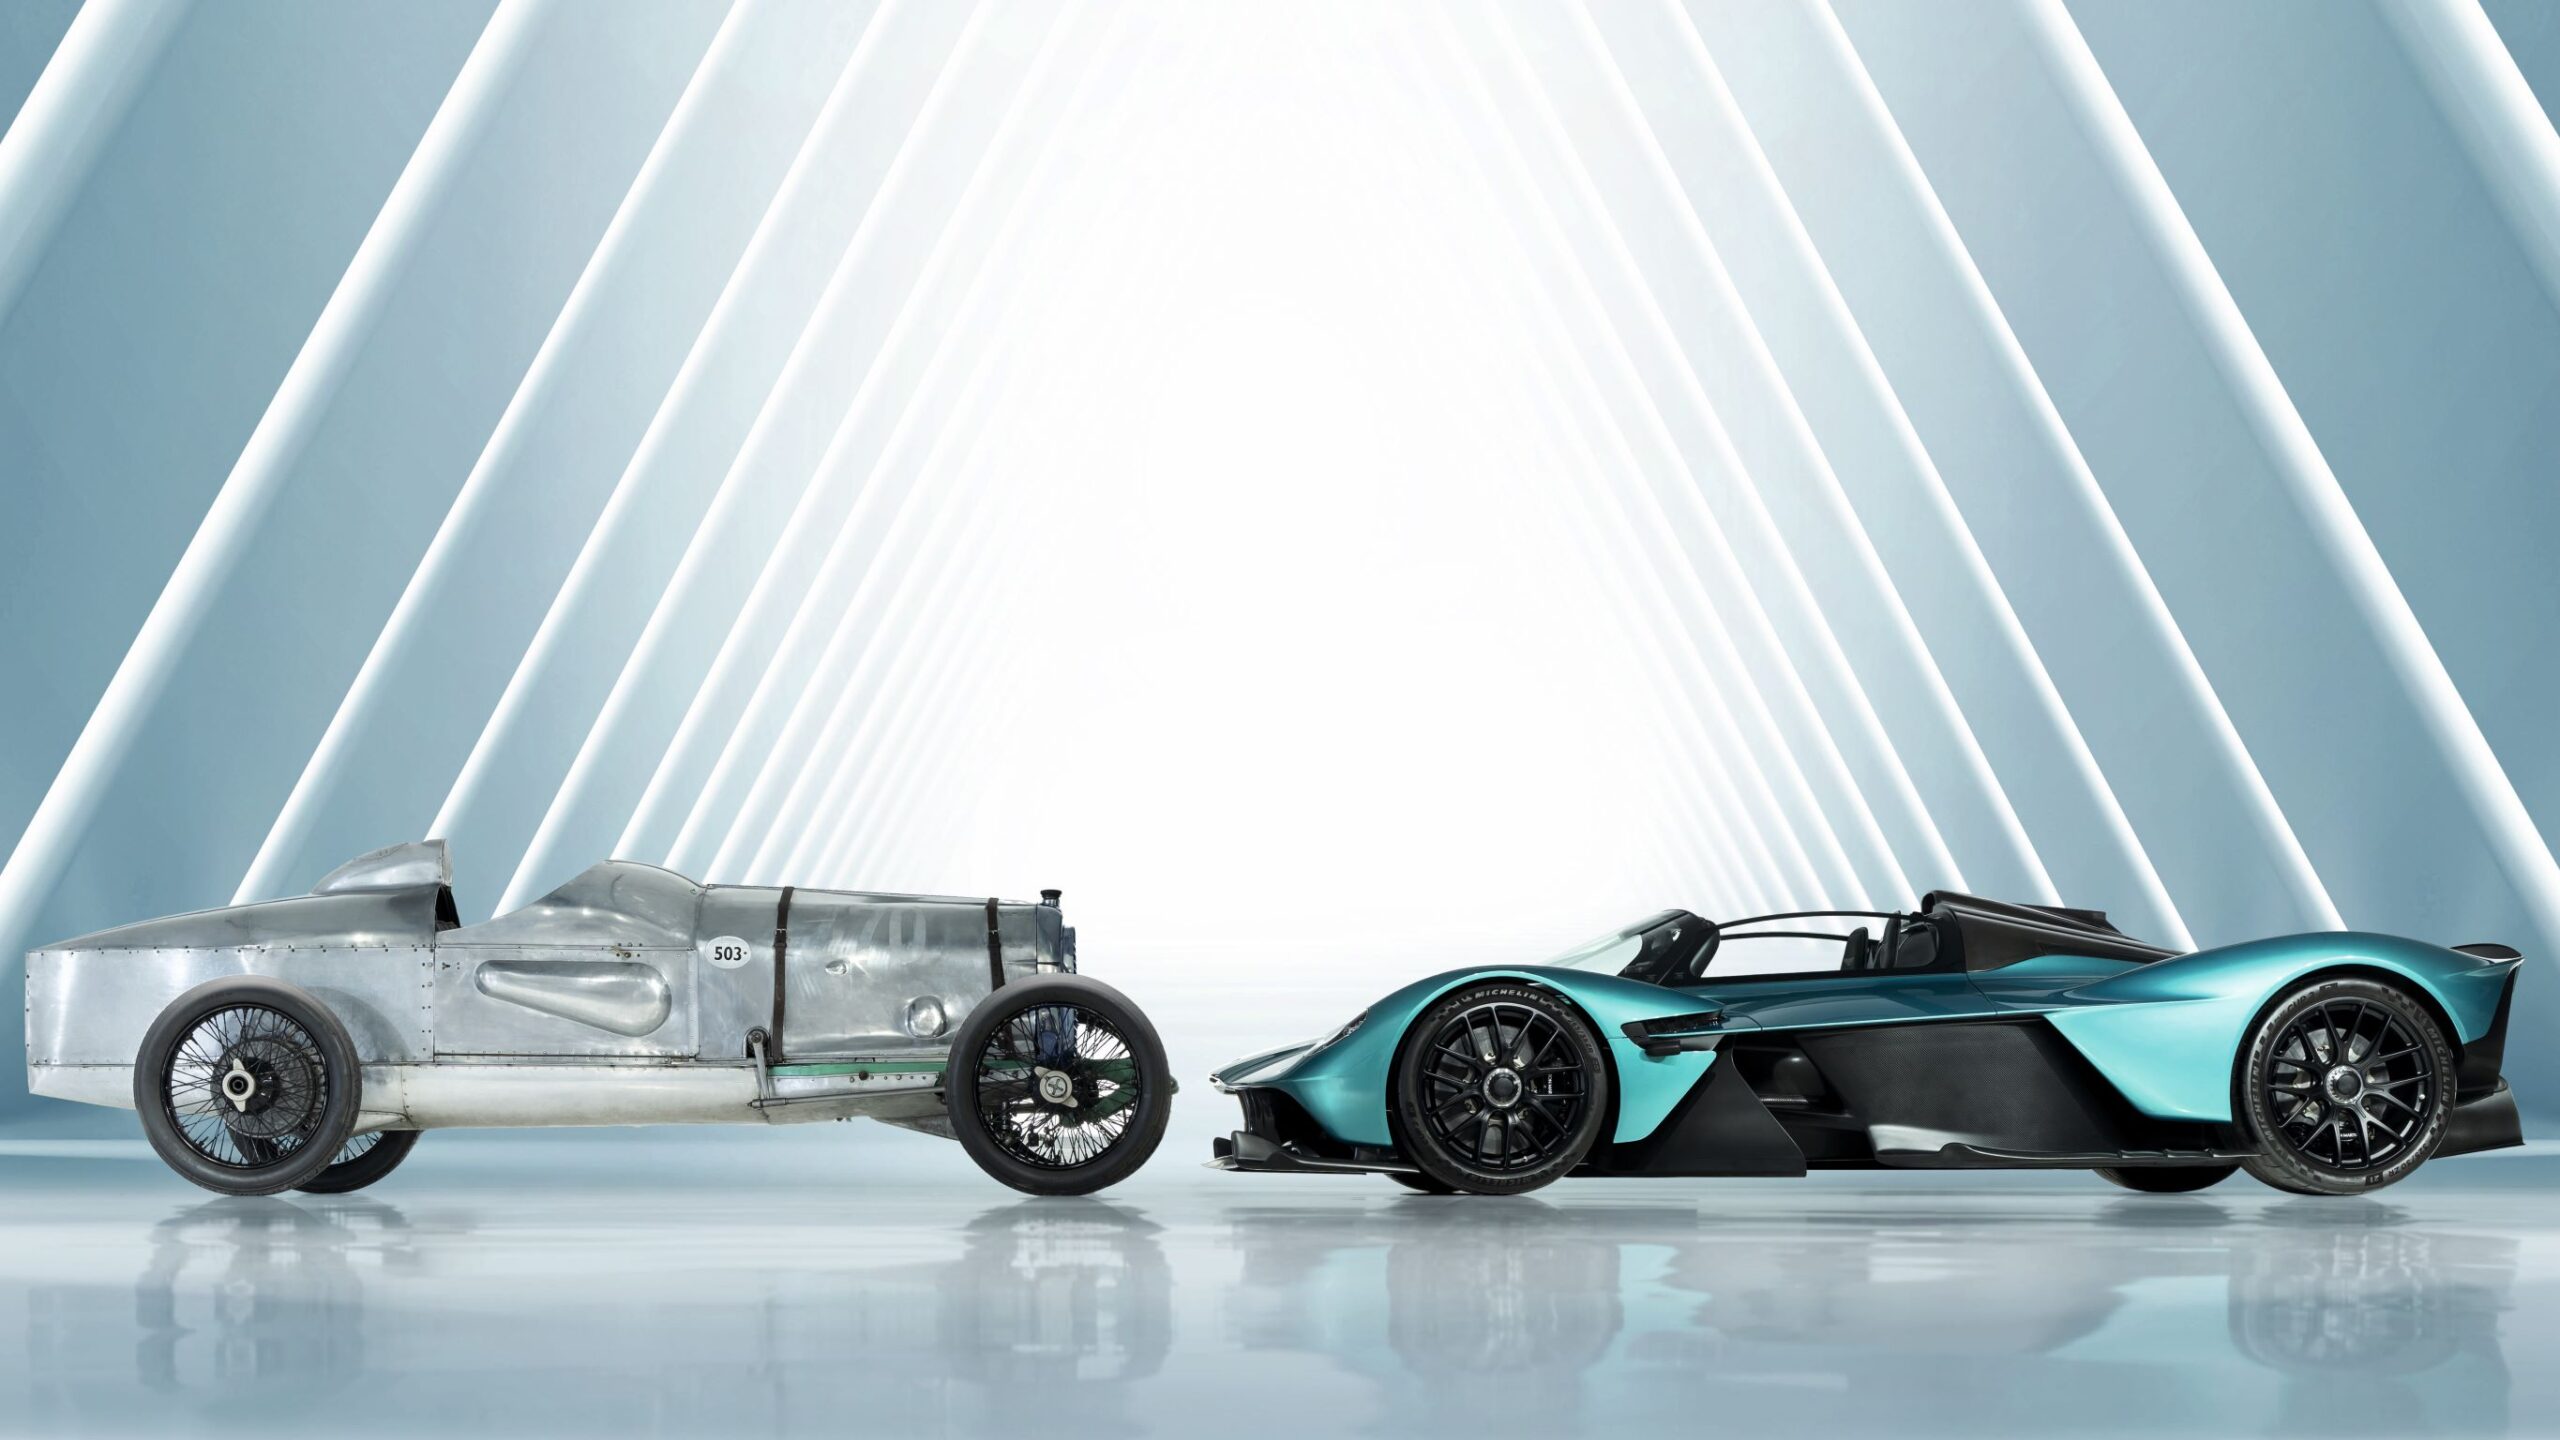 Side view of an Aston Martin Valkyrie on the right and an Aston Martin racer Razor Blade in silver on the left.